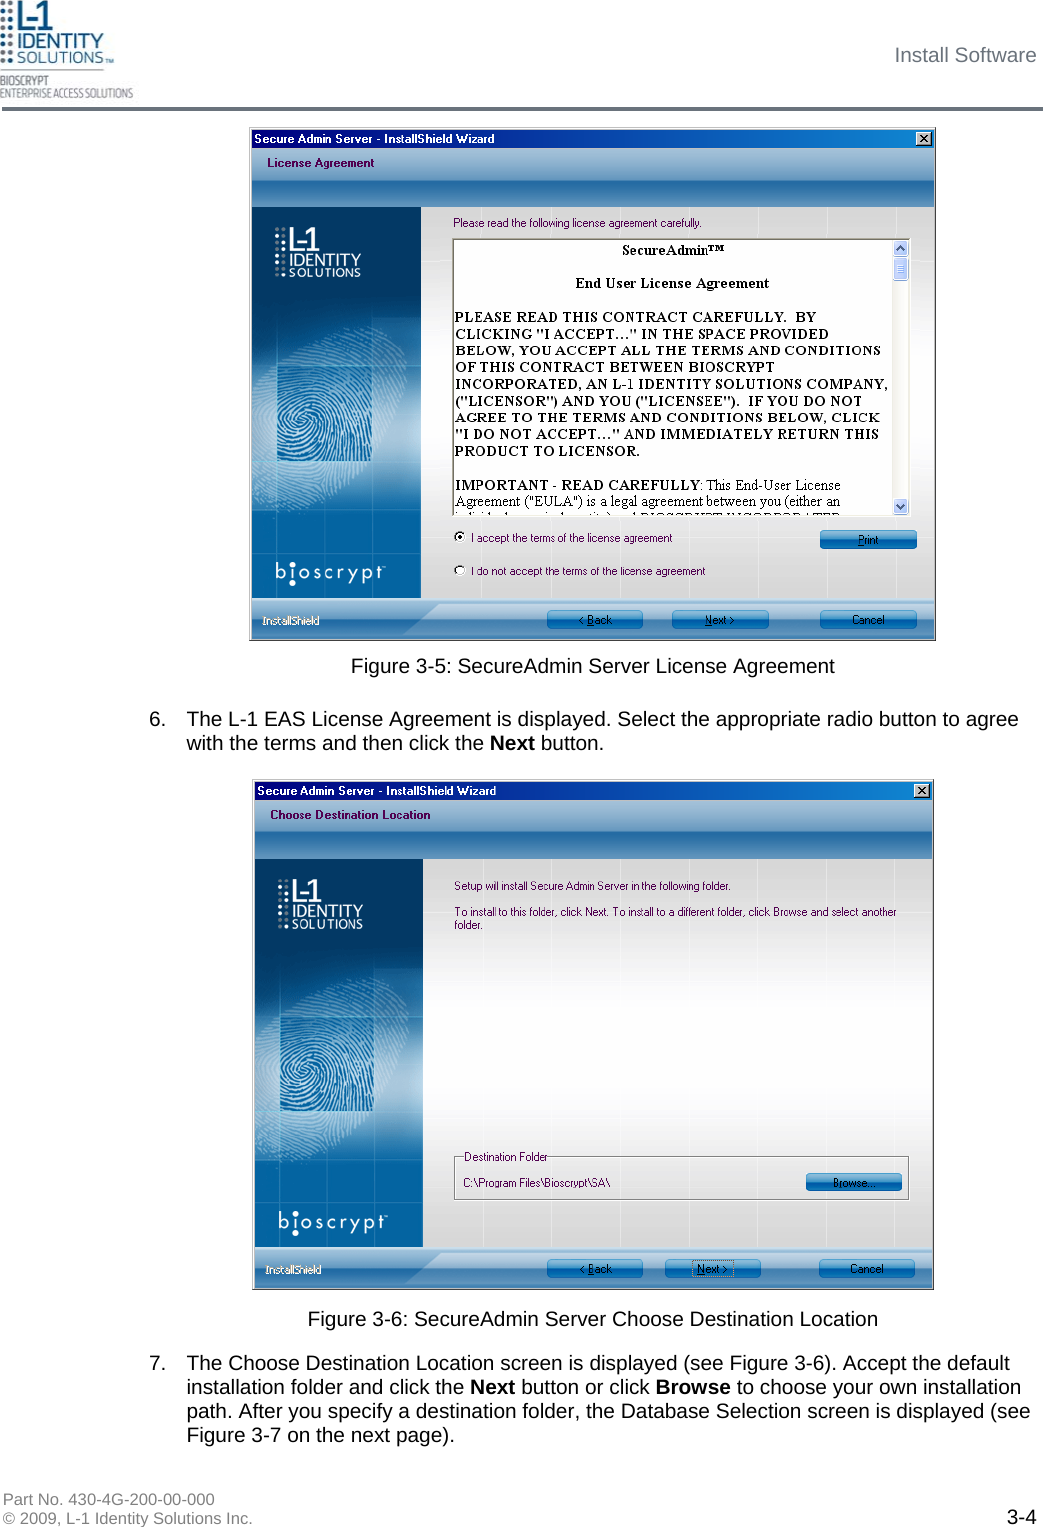 Install Software Part No. 430-4G-200-00-000 © 2009, L-1 Identity Solutions Inc.  3-4 6.  The L-1 EAS License Agreement is displayed. Select the appropriate radio button to agree with the terms and then click the Next button.  Figure 3-5: SecureAdmin Server License Agreement Figure 3-6: SecureAdmin Server Choose Destination Location 7.  The Choose Destination Location screen is displayed (see Figure 3-6). Accept the default installation folder and click the Next button or click Browse to choose your own installation path. After you specify a destination folder, the Database Selection screen is displayed (see Figure 3-7 on the next page). 